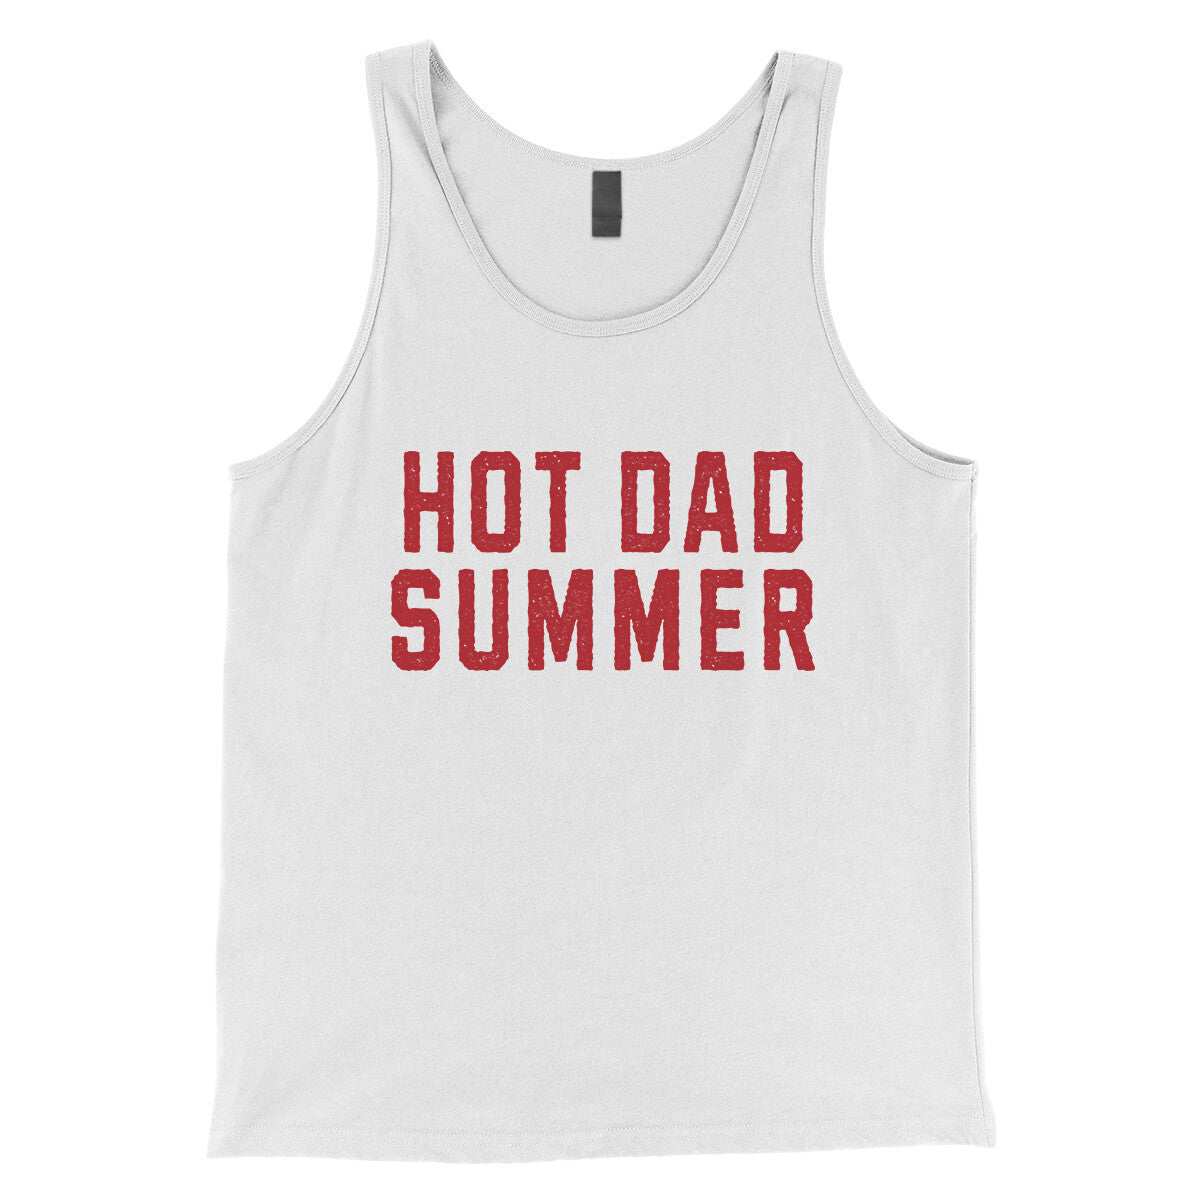 Hot Dad Summer in White Color